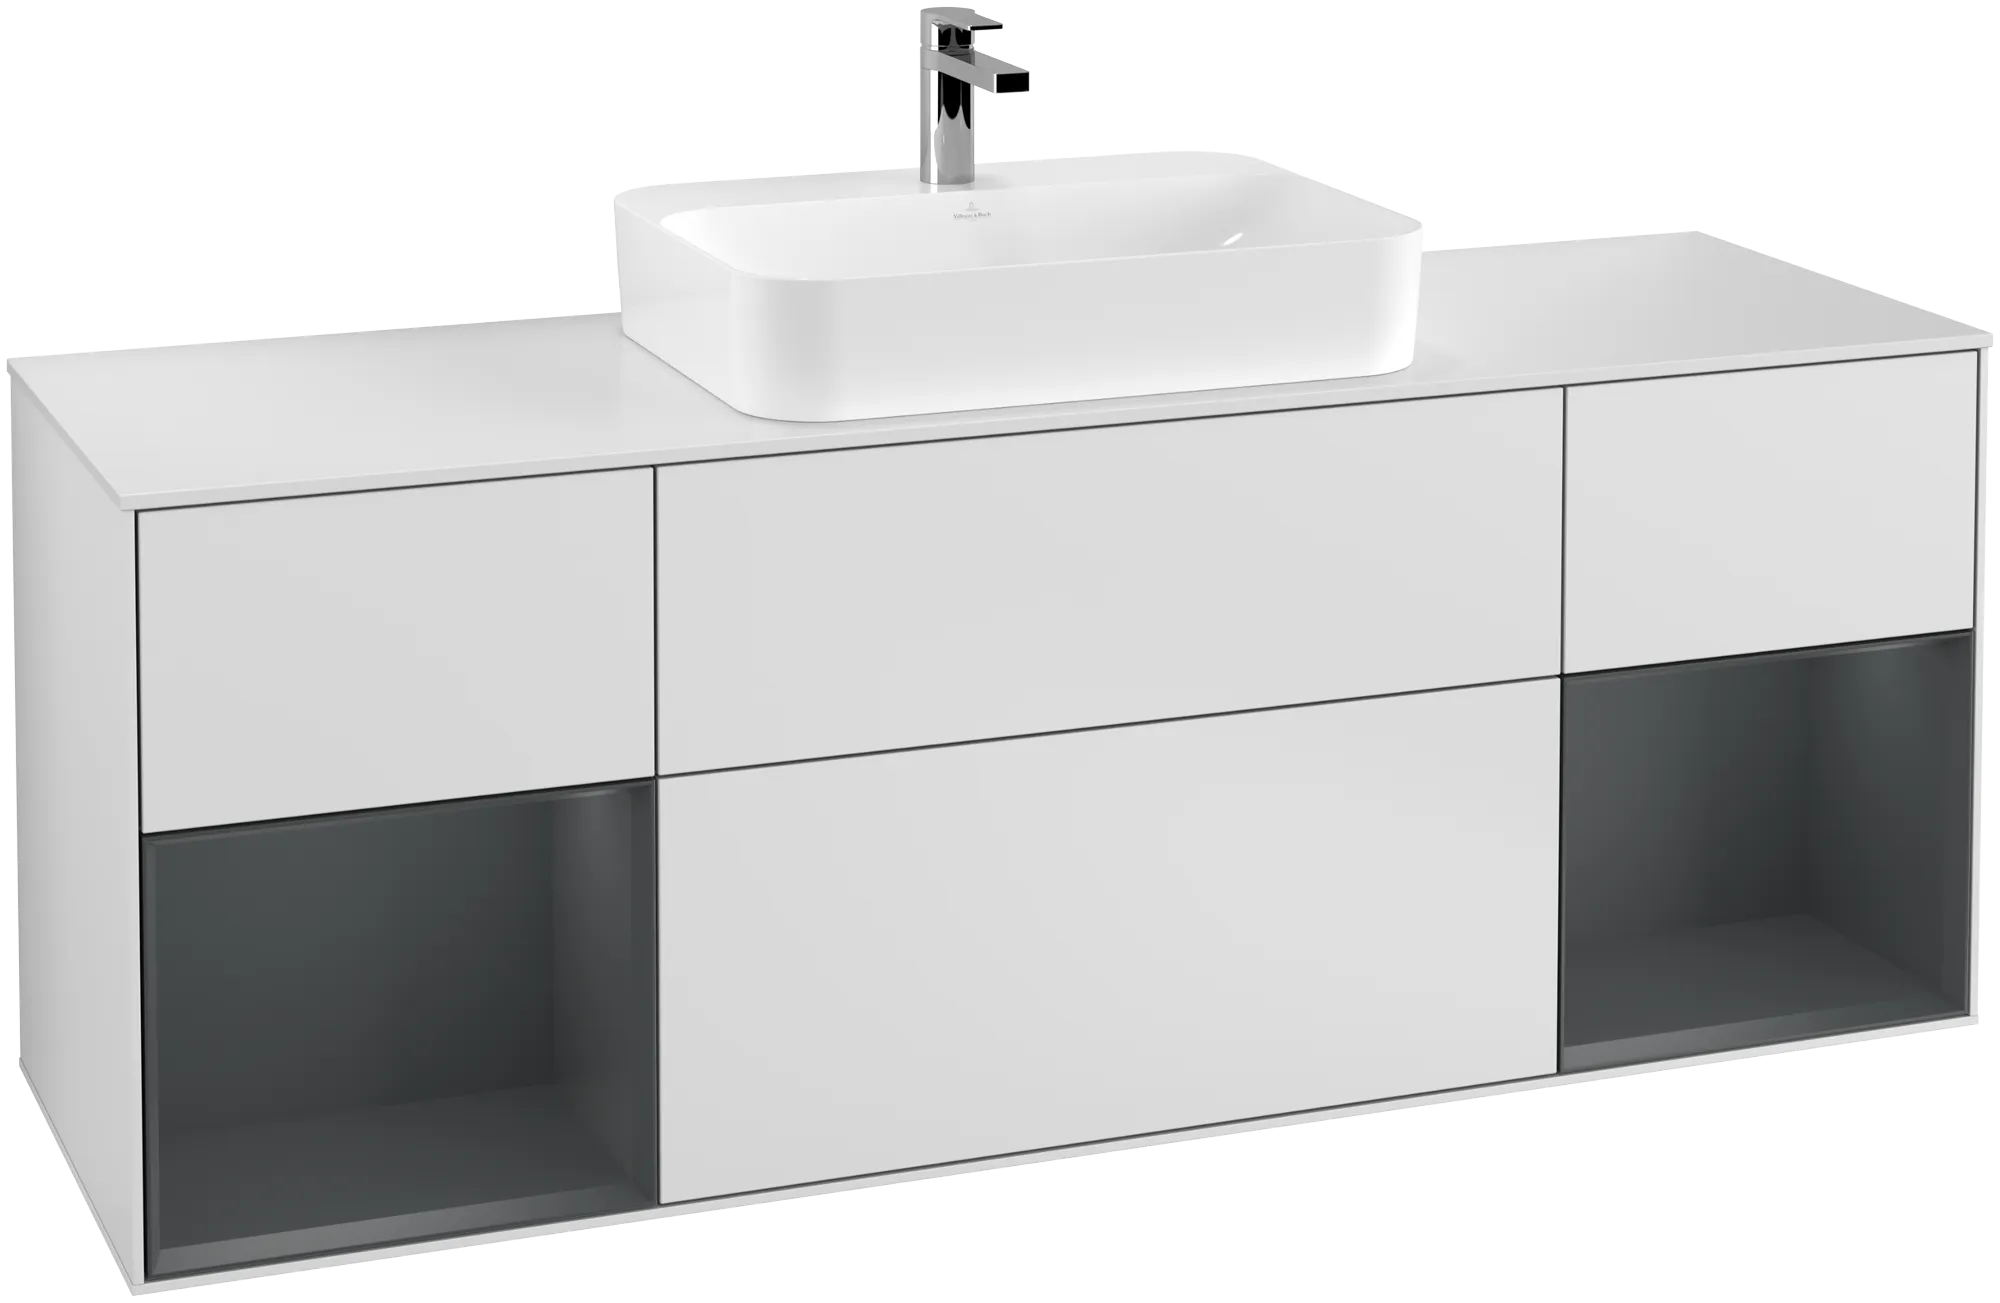 VILLEROY BOCH Finion Vanity unit, with lighting, 4 pull-out compartments, 1600 x 603 x 501 mm, White Matt Lacquer / Midnight Blue Matt Lacquer / Glass White Matt #G451HGMT resmi